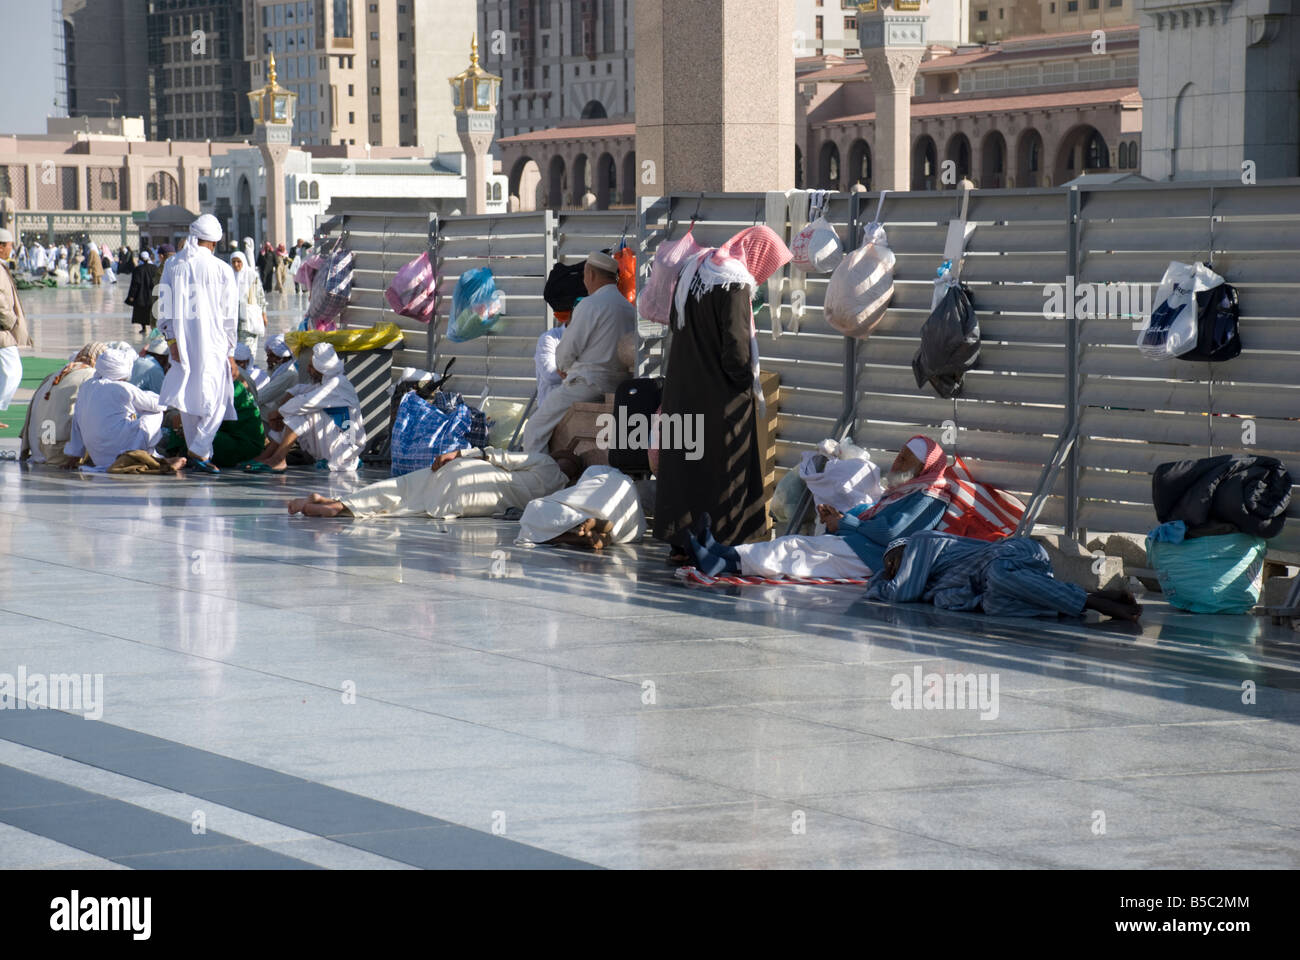 Some pilgrims sleep in the courtyaard of Masjid al Nabawi in Madinah and they tie their luggage to the fences Saudi Arabia Stock Photo